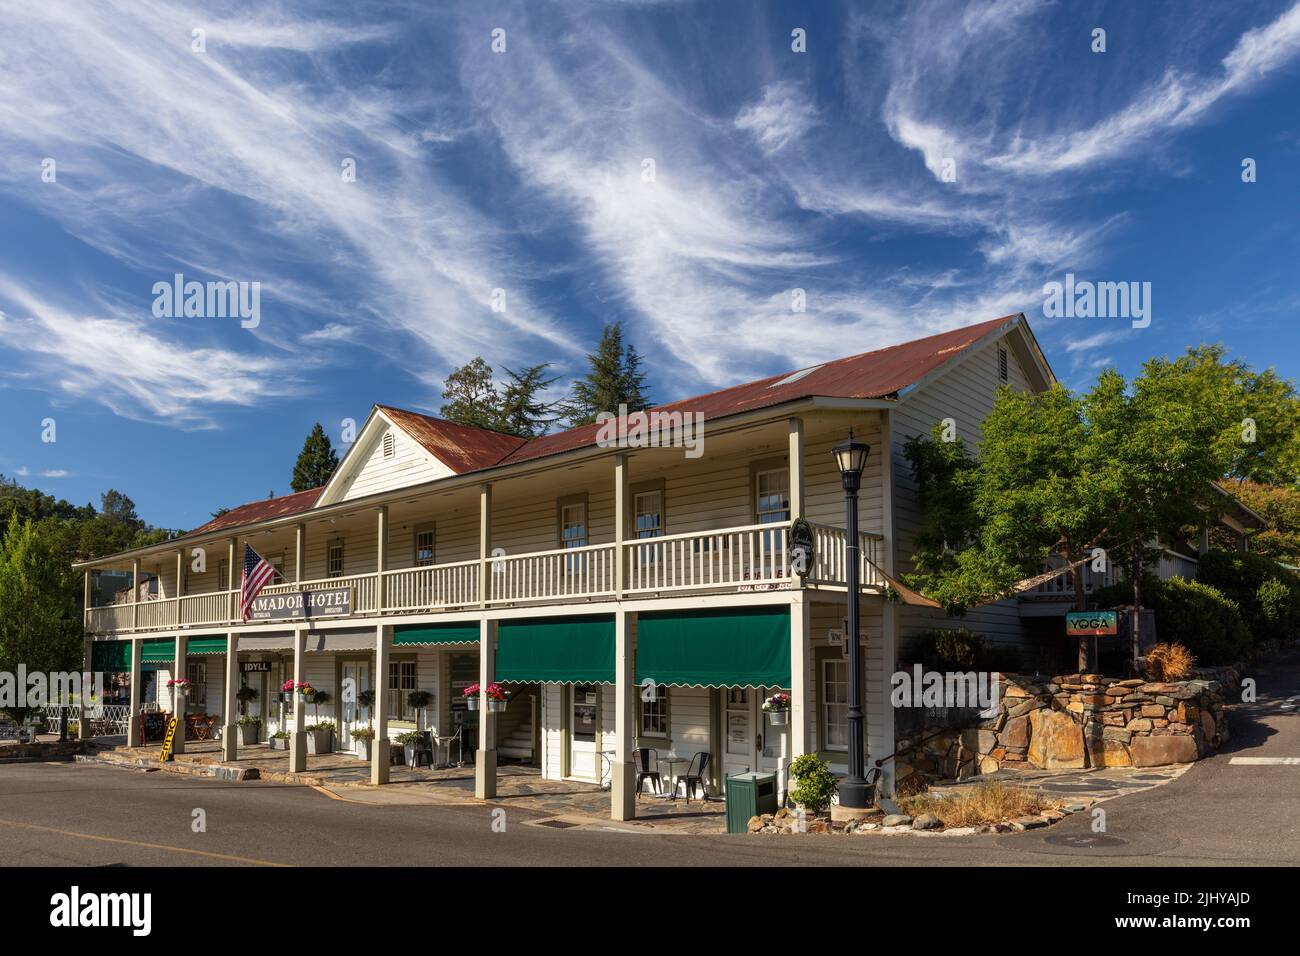 Spectacular skies over the Amador Hotel on Highway 49 in the Gold Rush Country, Amador City, California Stock Photo